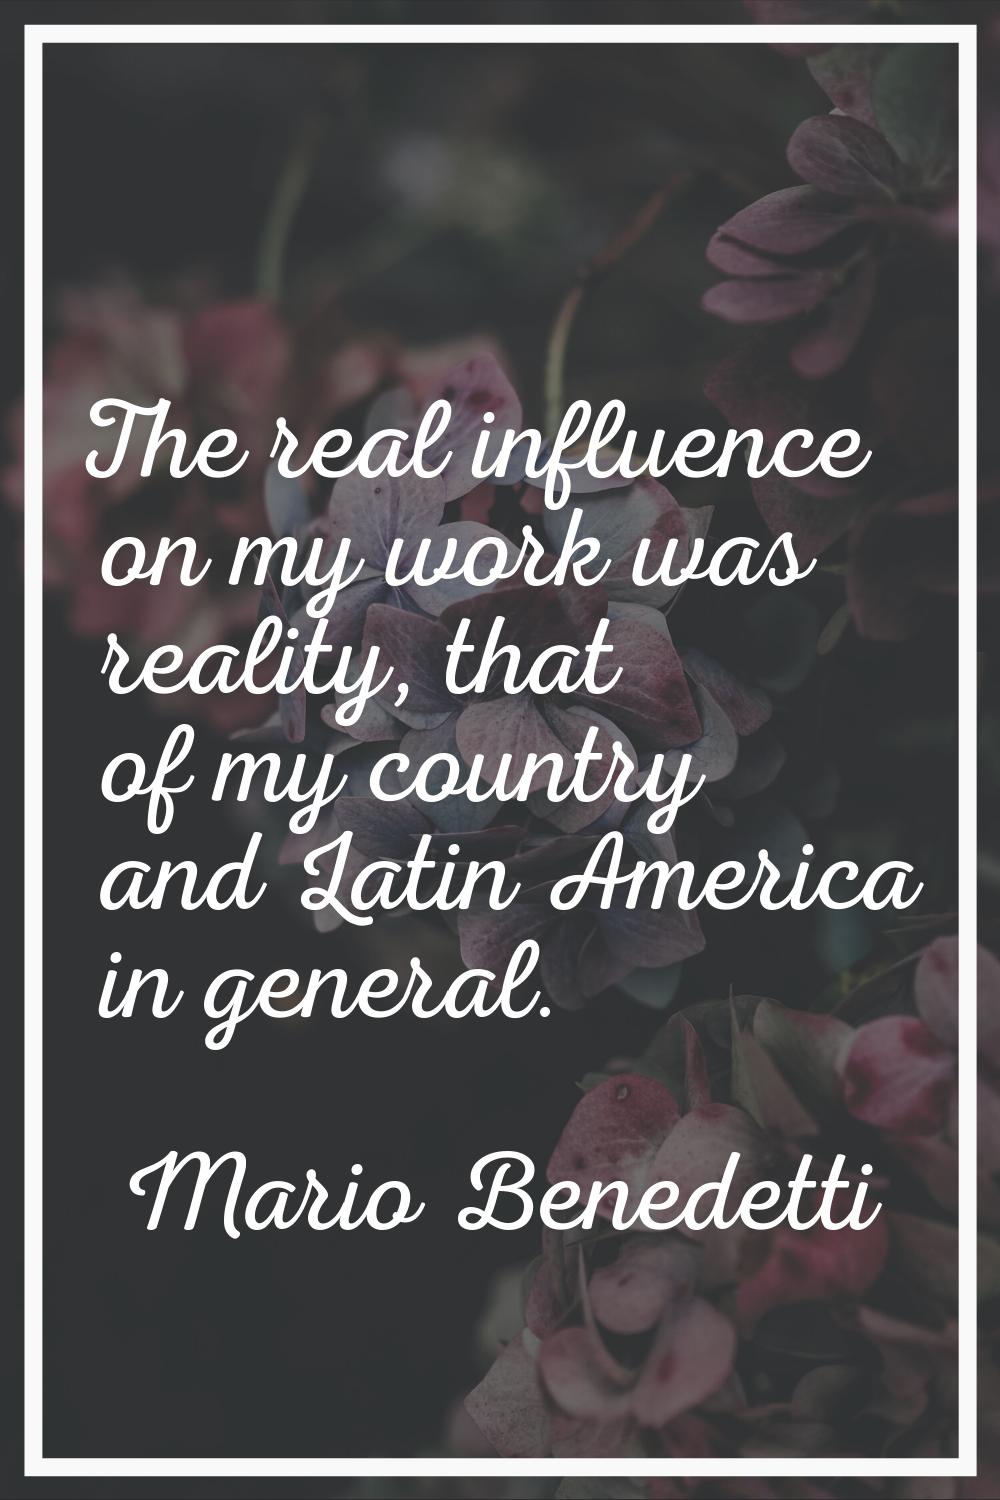 The real influence on my work was reality, that of my country and Latin America in general.